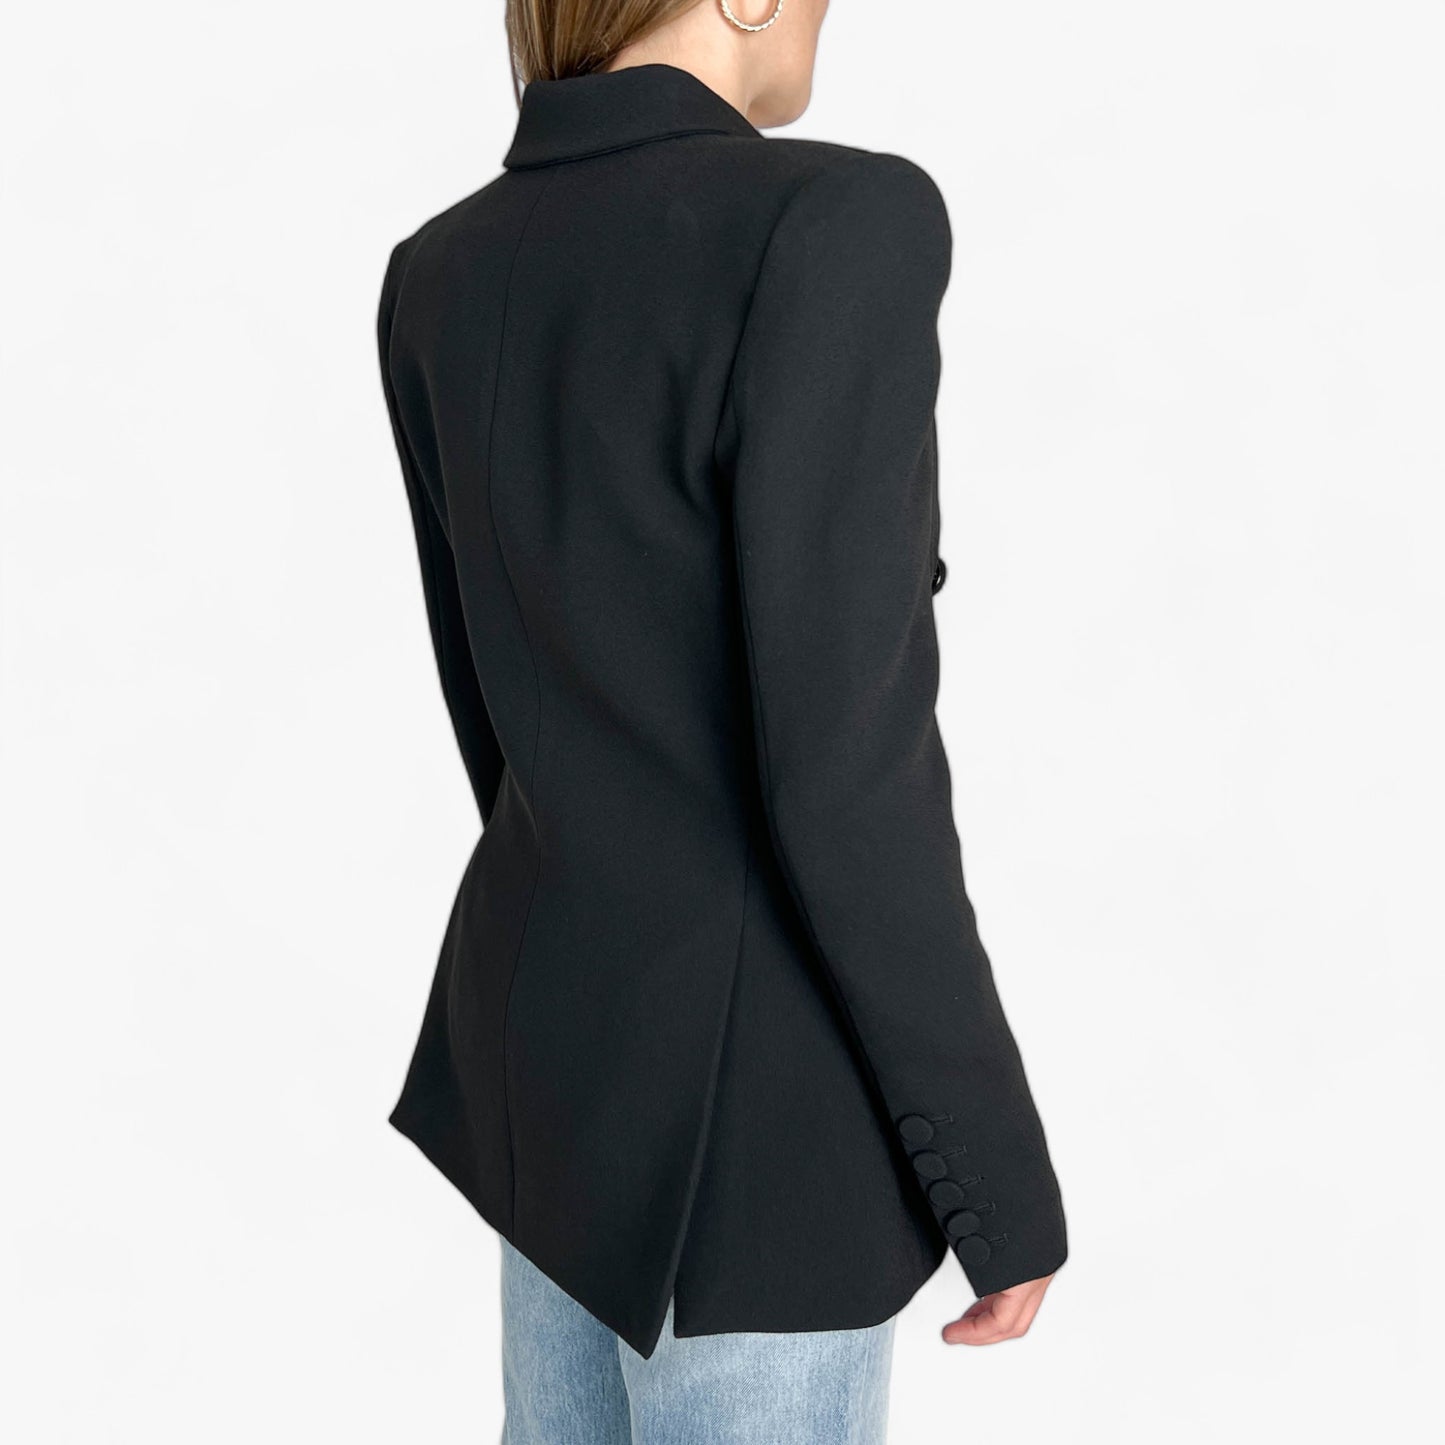 Alex Perry Black Stretch Crepe Double Breast Fitted Blazer Jacket 10